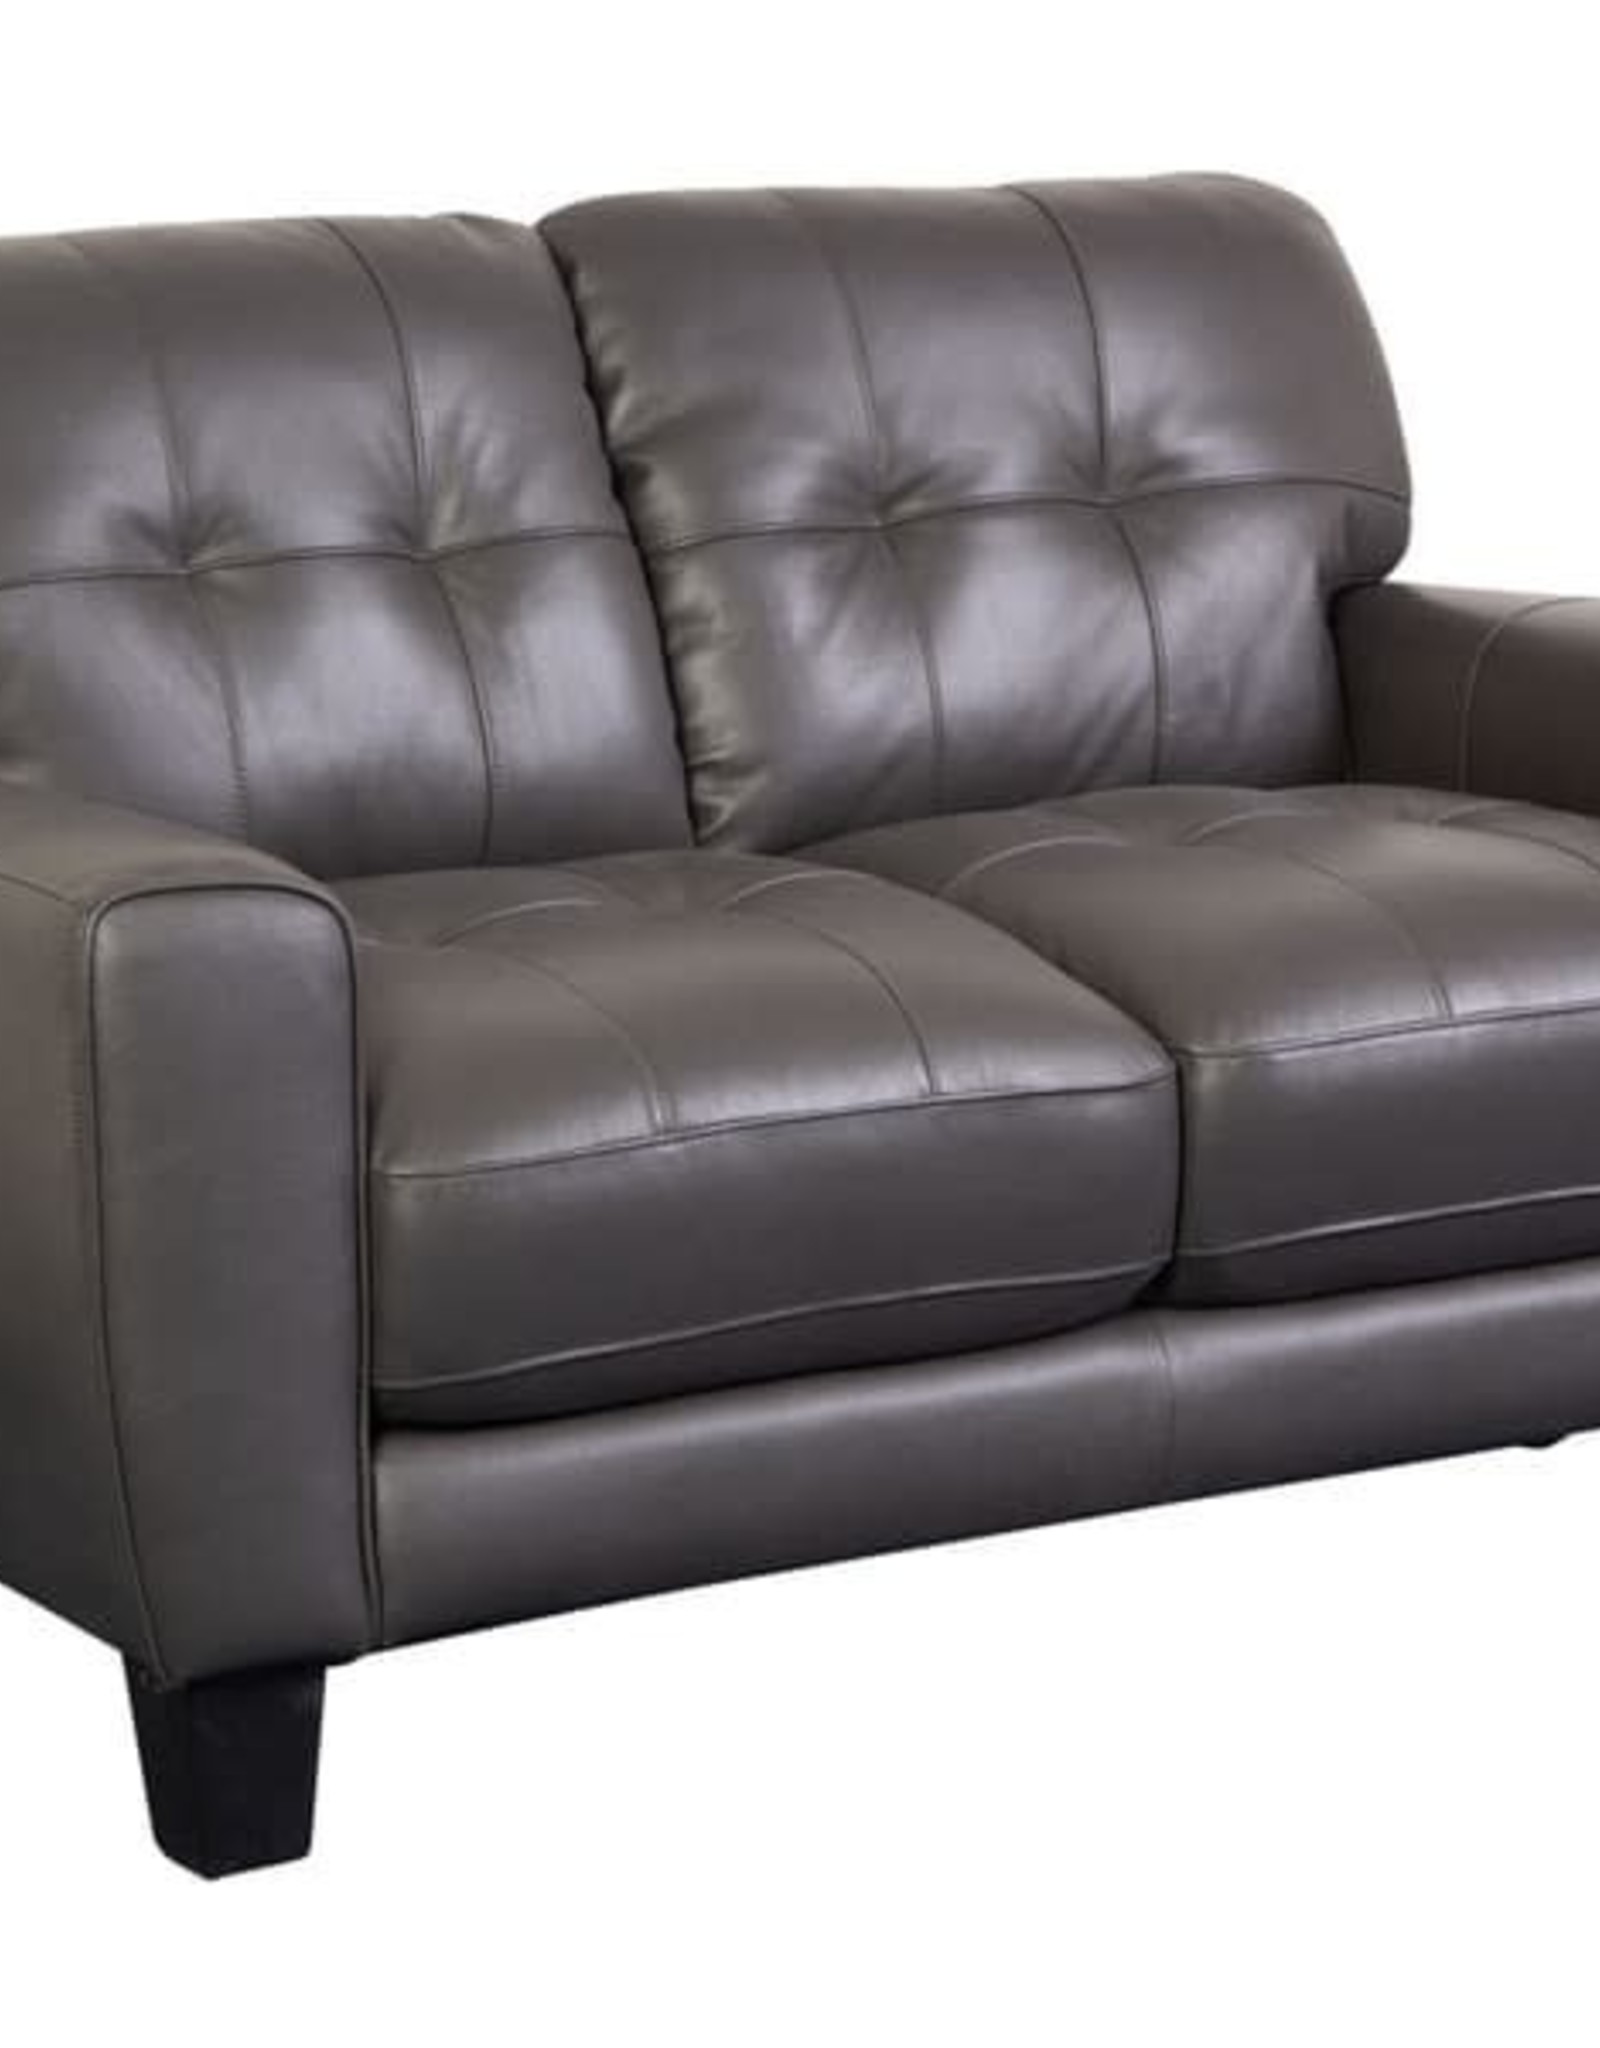 Penner Love Seat